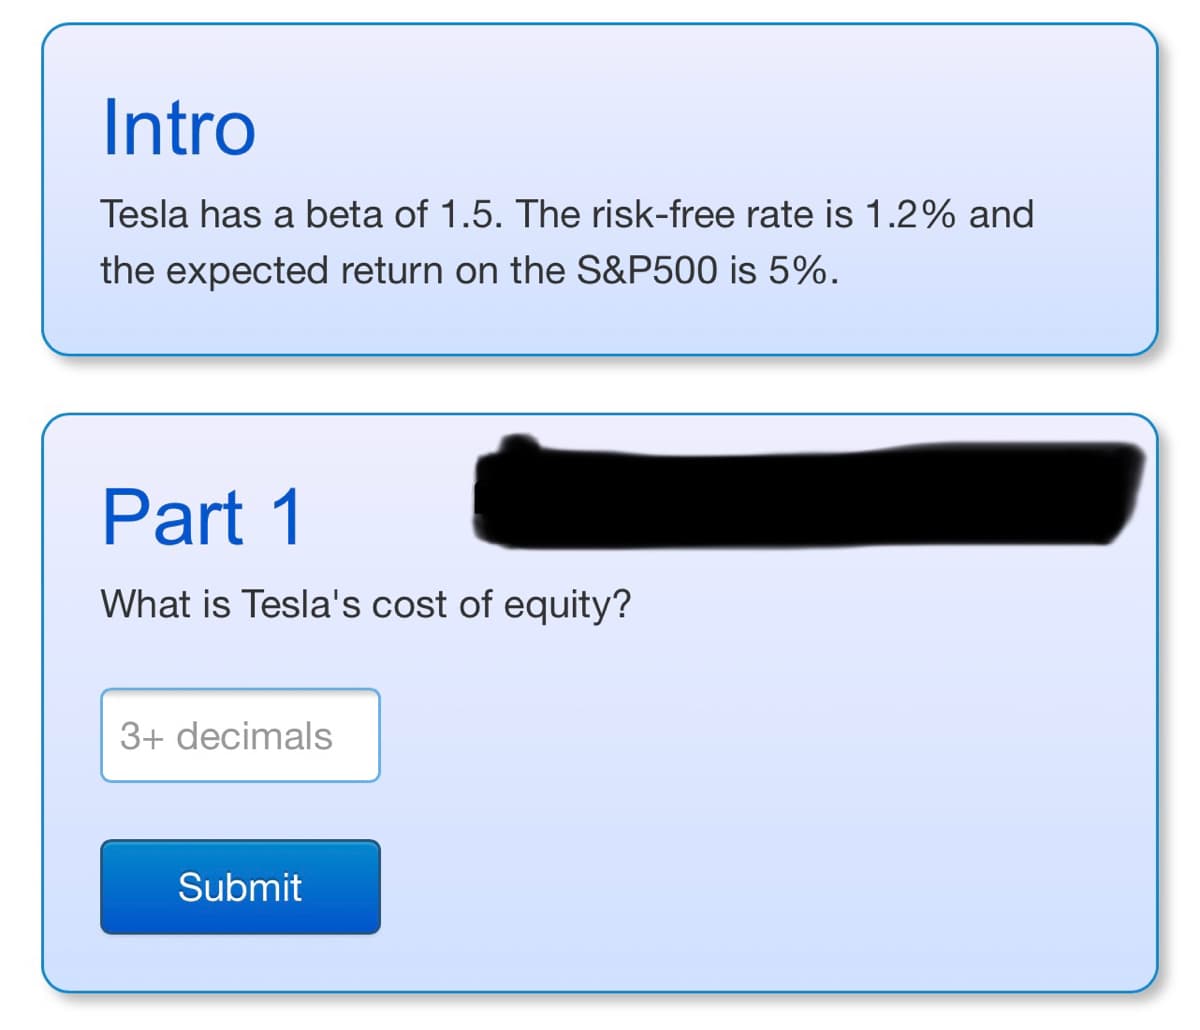 Intro
Tesla has a beta of 1.5. The risk-free rate is 1.2% and
the expected return on the S&P500 is 5%.
Part 1
What is Tesla's cost of equity?
3+ decimals
Submit